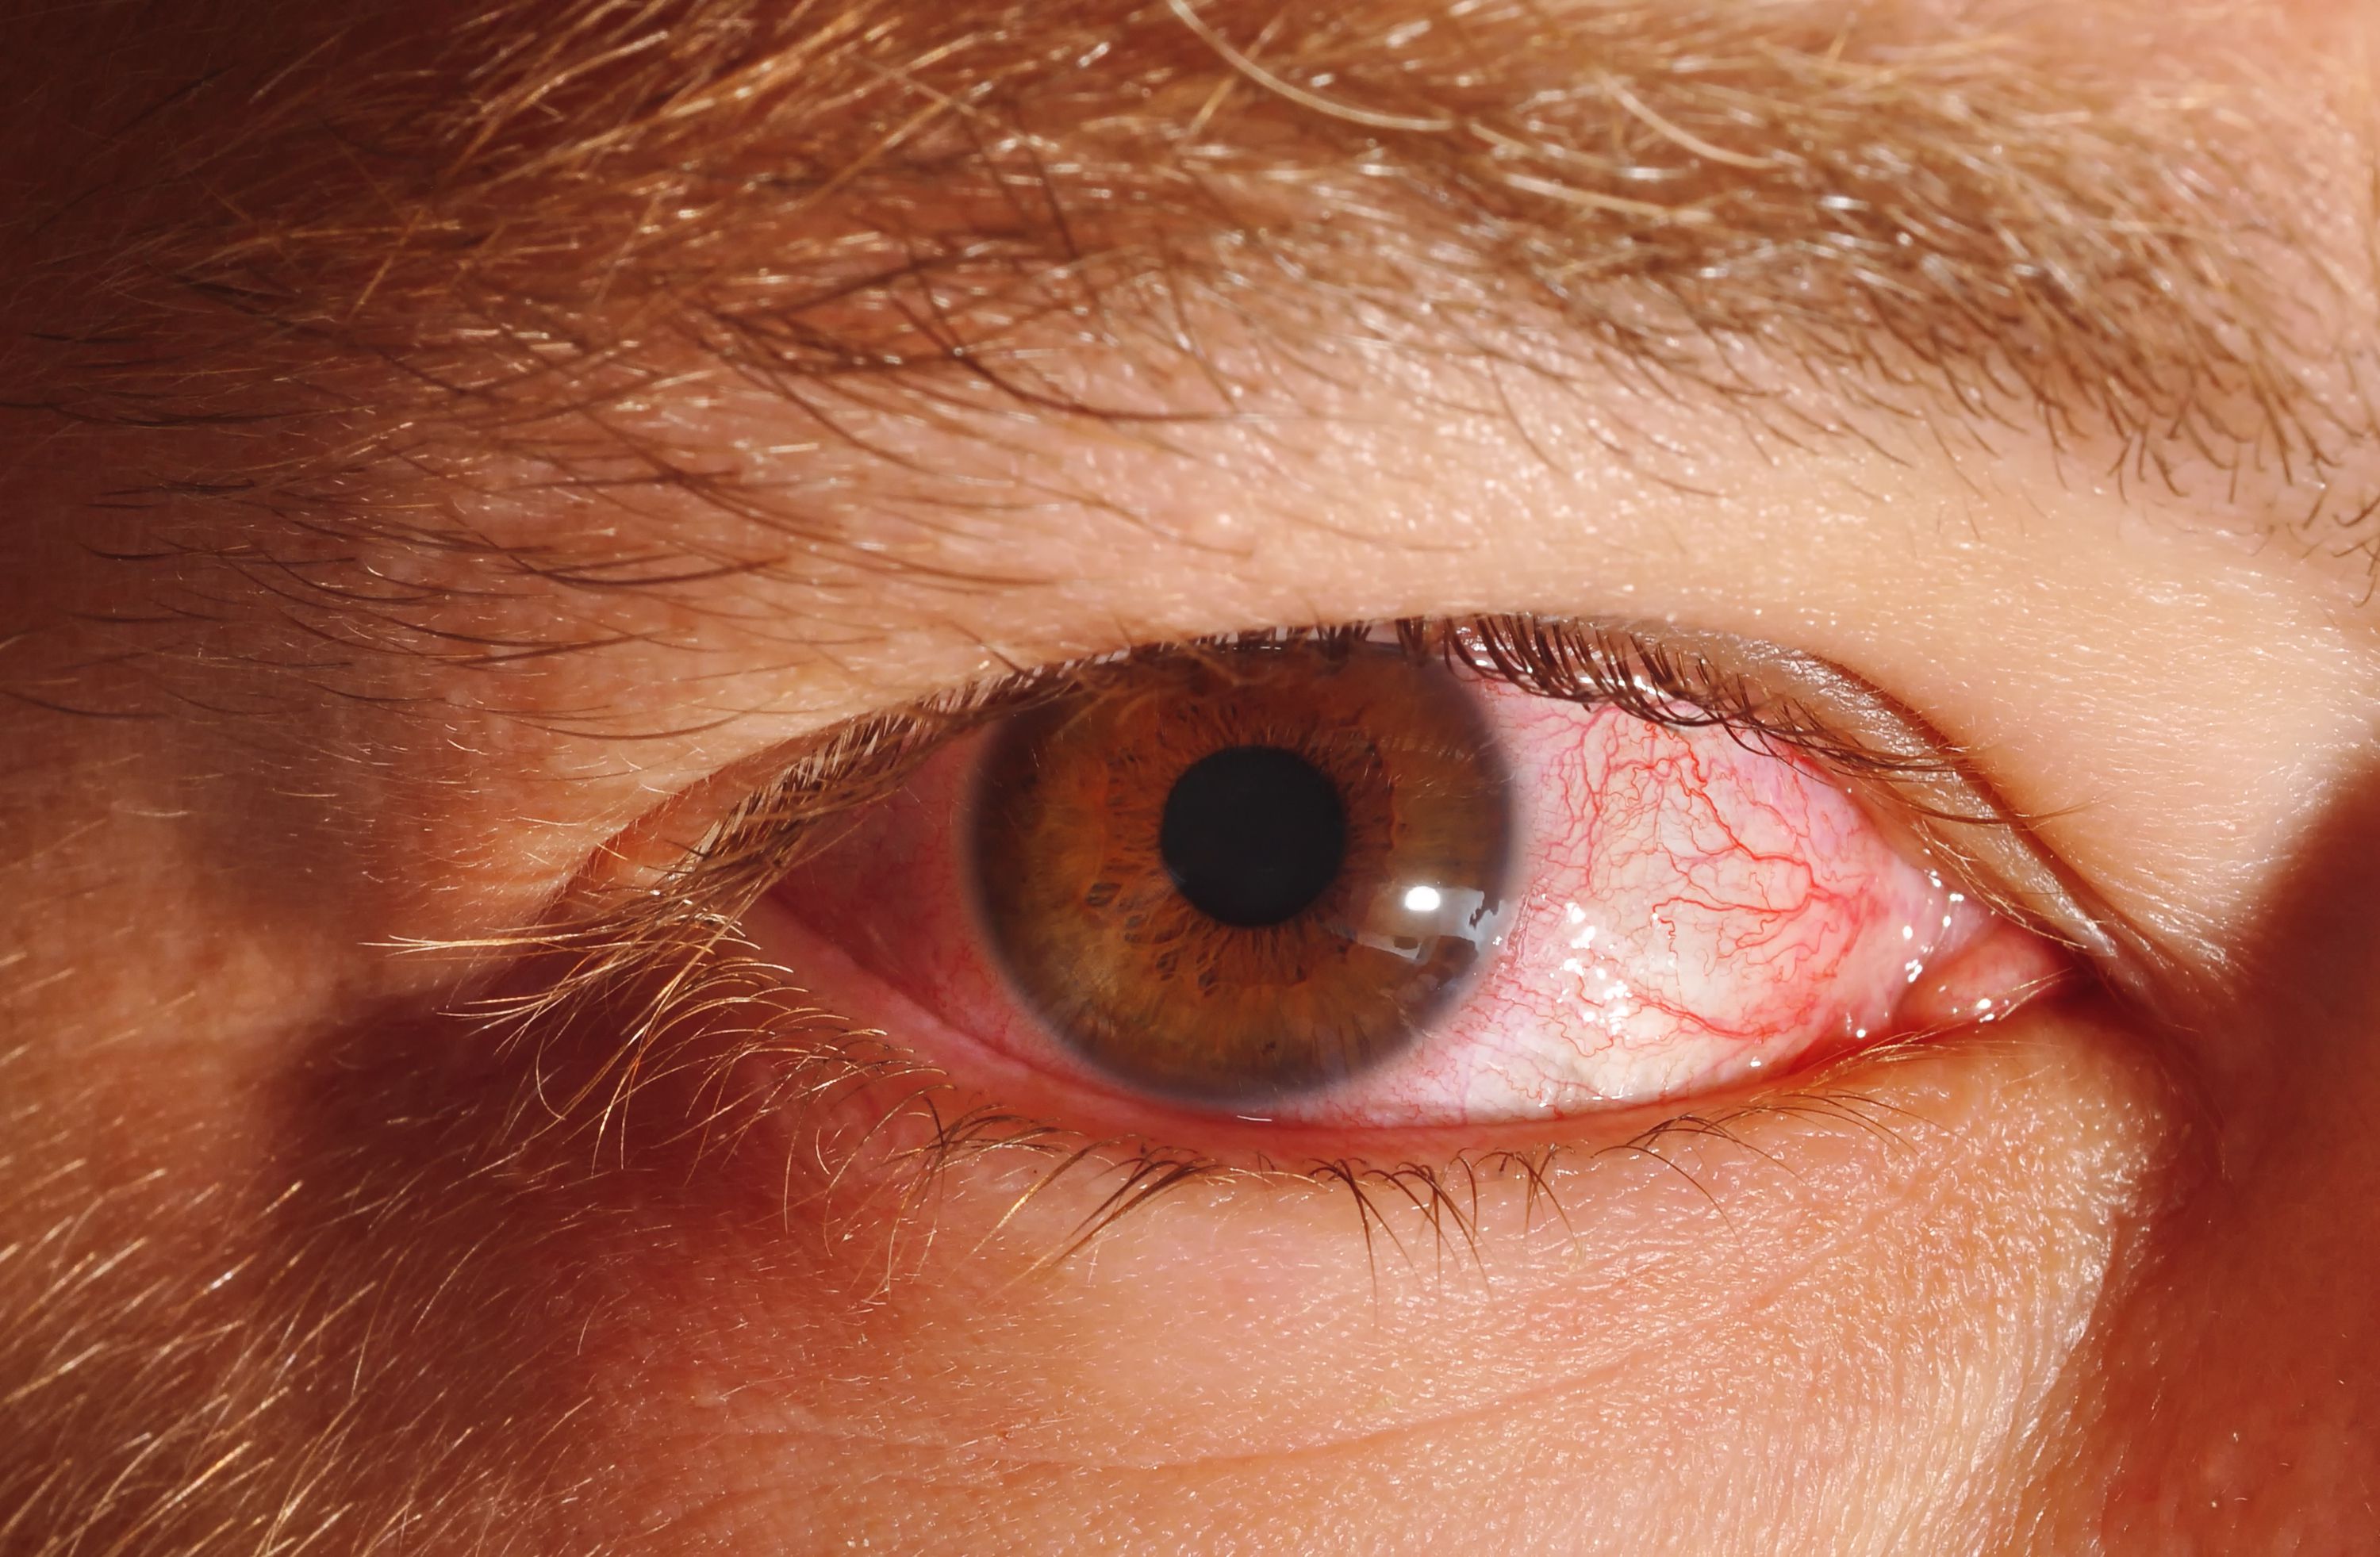 Eye Herpes Symptoms and Treatment3000 x 1963